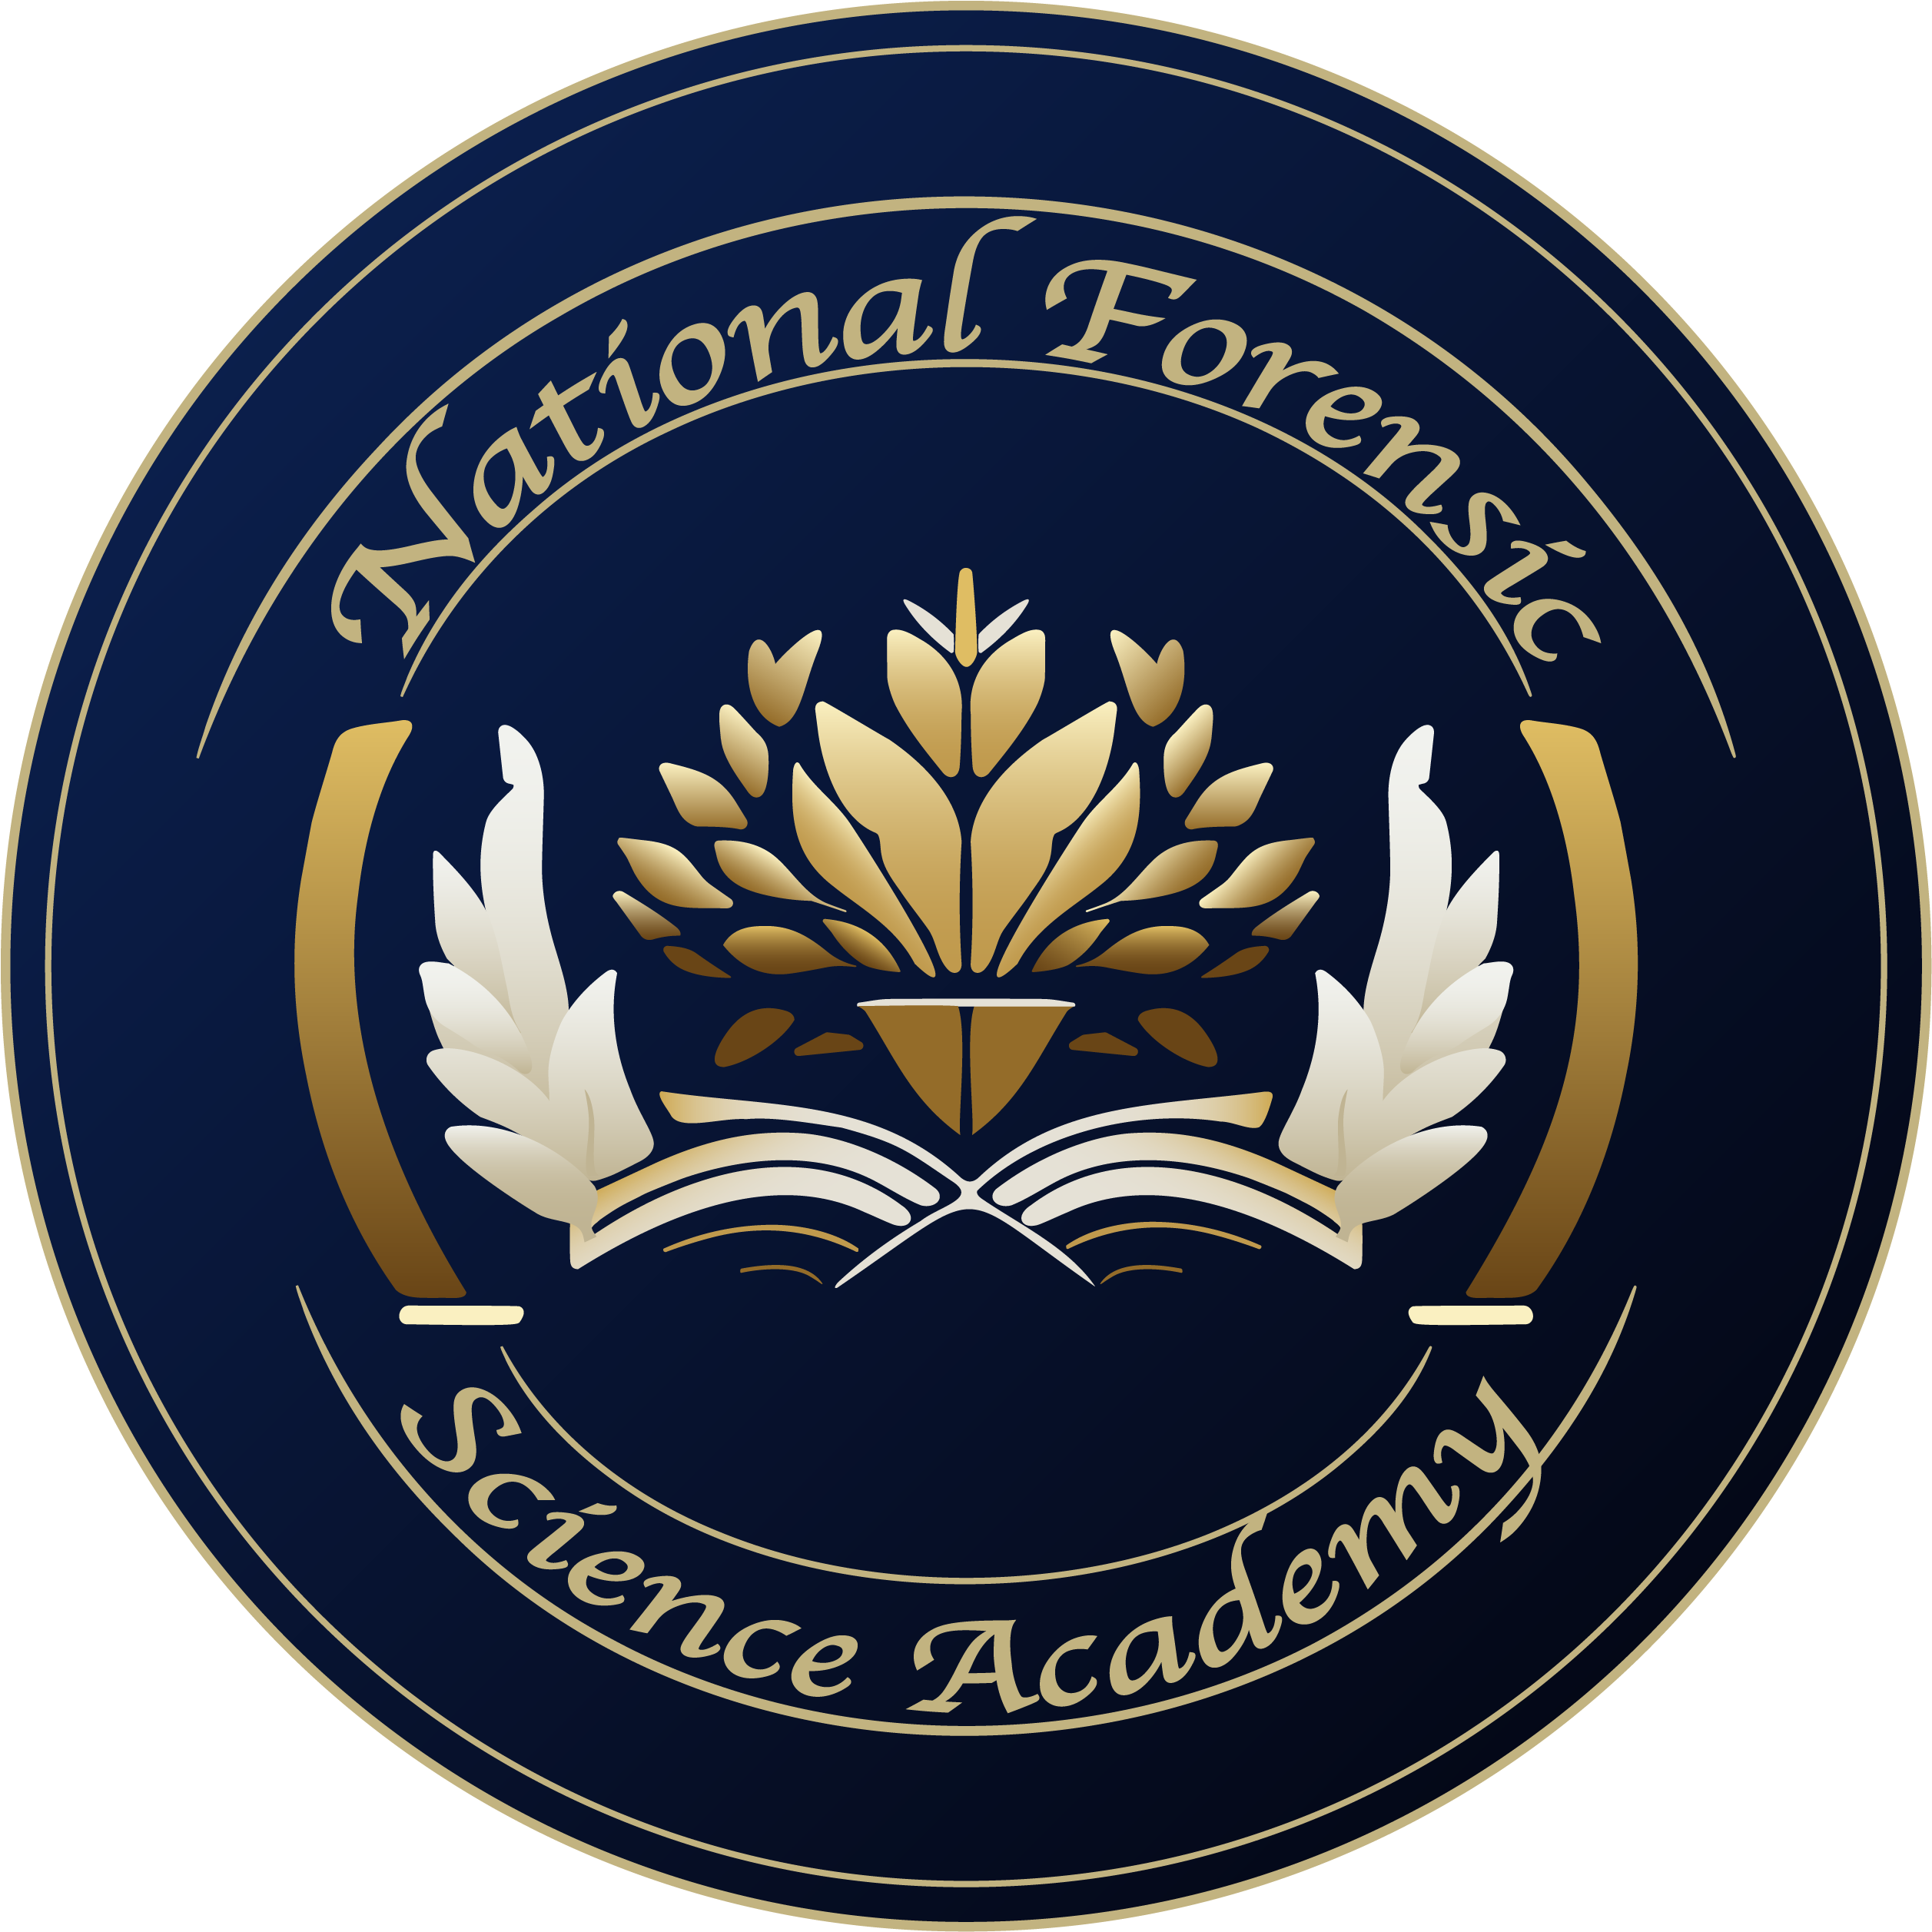 Certified Forensic Manager - I​I